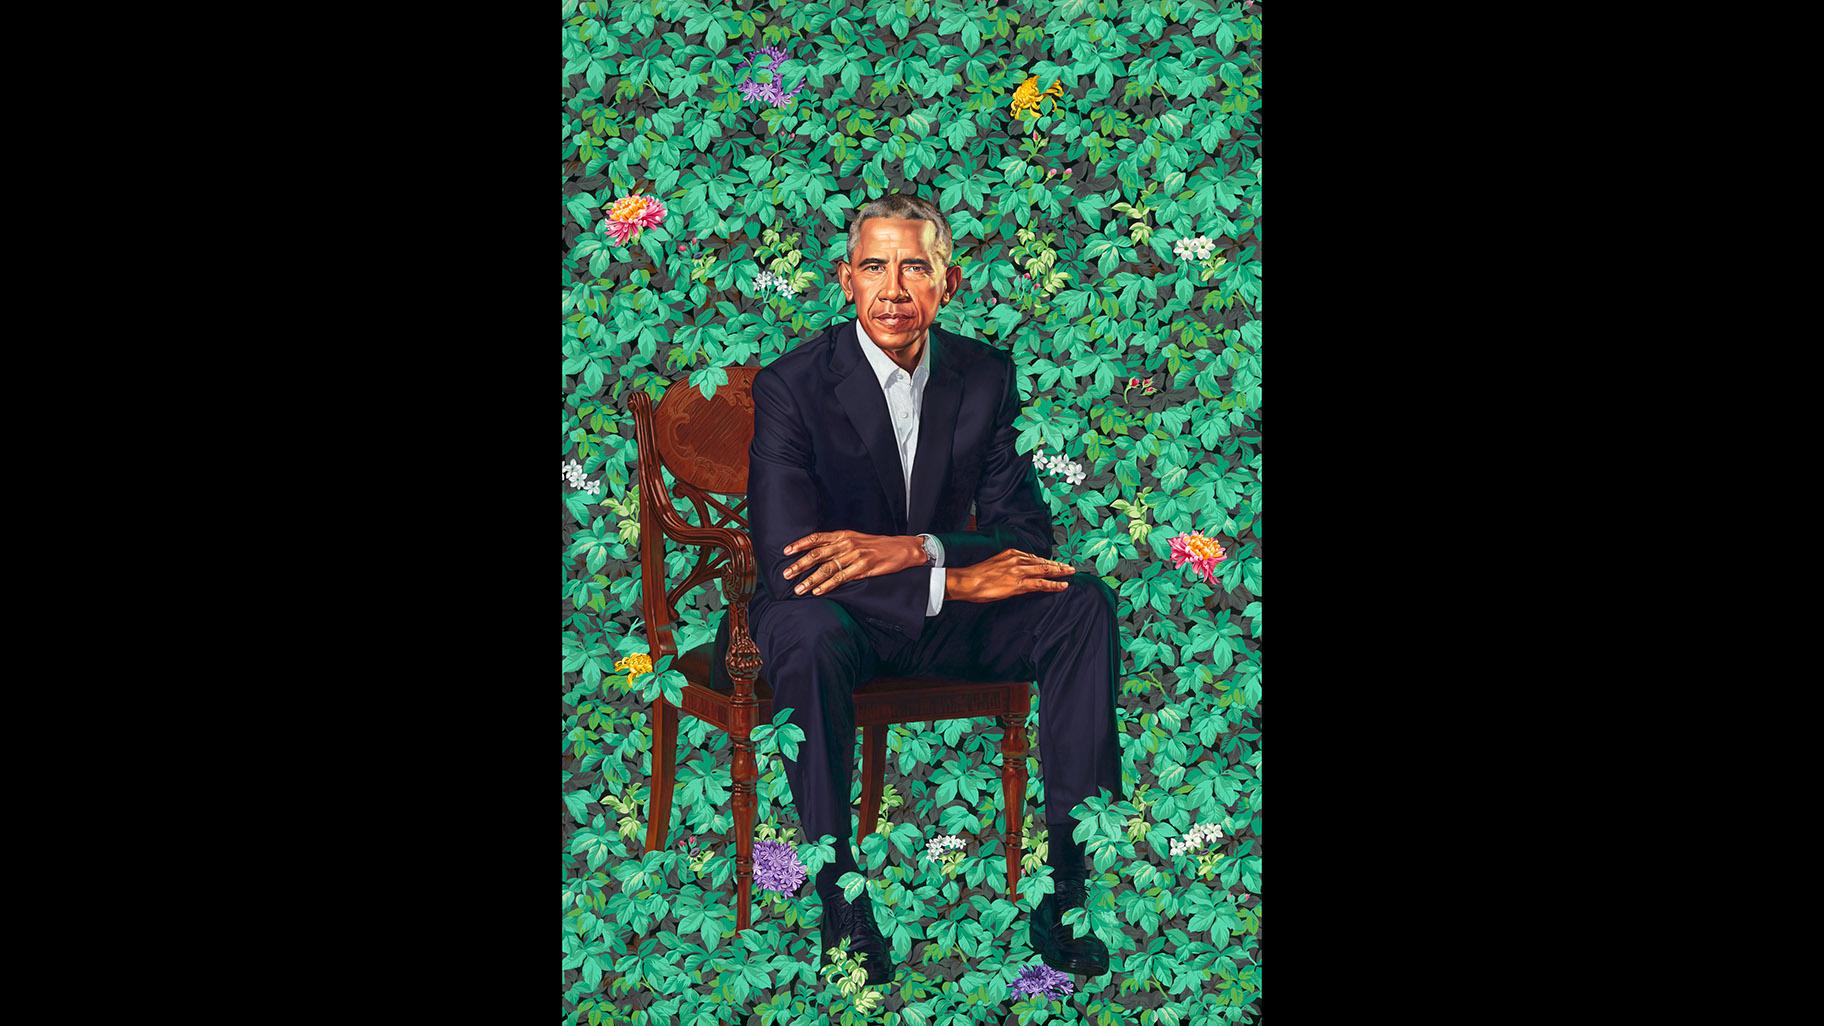 Kehinde Wiley. “Barack Obama,” 2018. Oil on canvas. National Portrait Gallery, Smithsonian Institution. The National Portrait Gallery is grateful to the following lead donors for their support of the Obama portraits: Kate Capshaw and Steven Spielberg; Judith Kern and Kent Whealy; Tommie L.Pegues and Donald A. Capoccia. © 2018 Kehinde Wiley. Courtesy of the Smithsonian’s National Portrait Gallery.